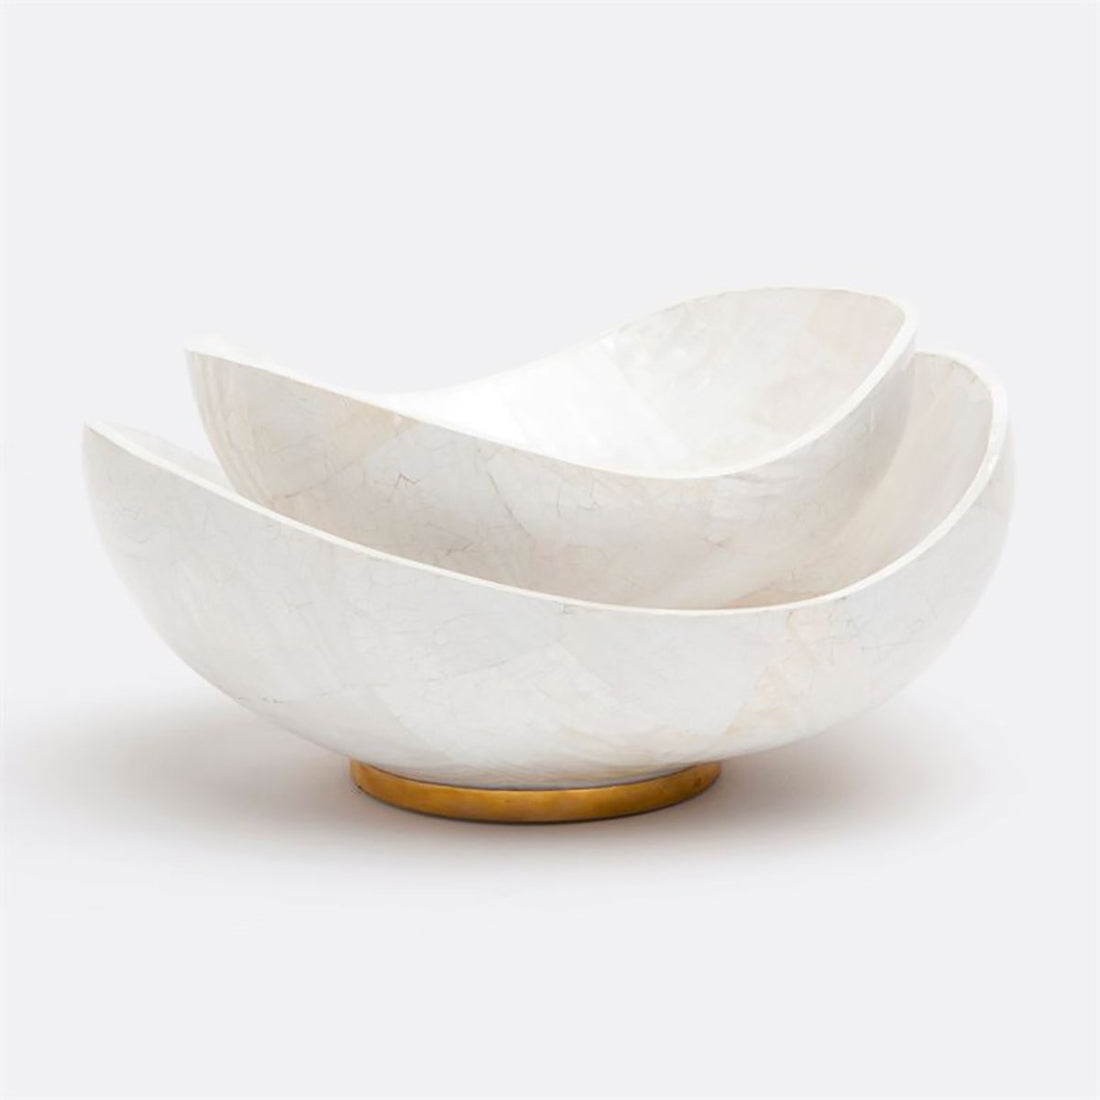 Made Goods Tarian Shell with Gold Base Bowl, 2-Piece Set